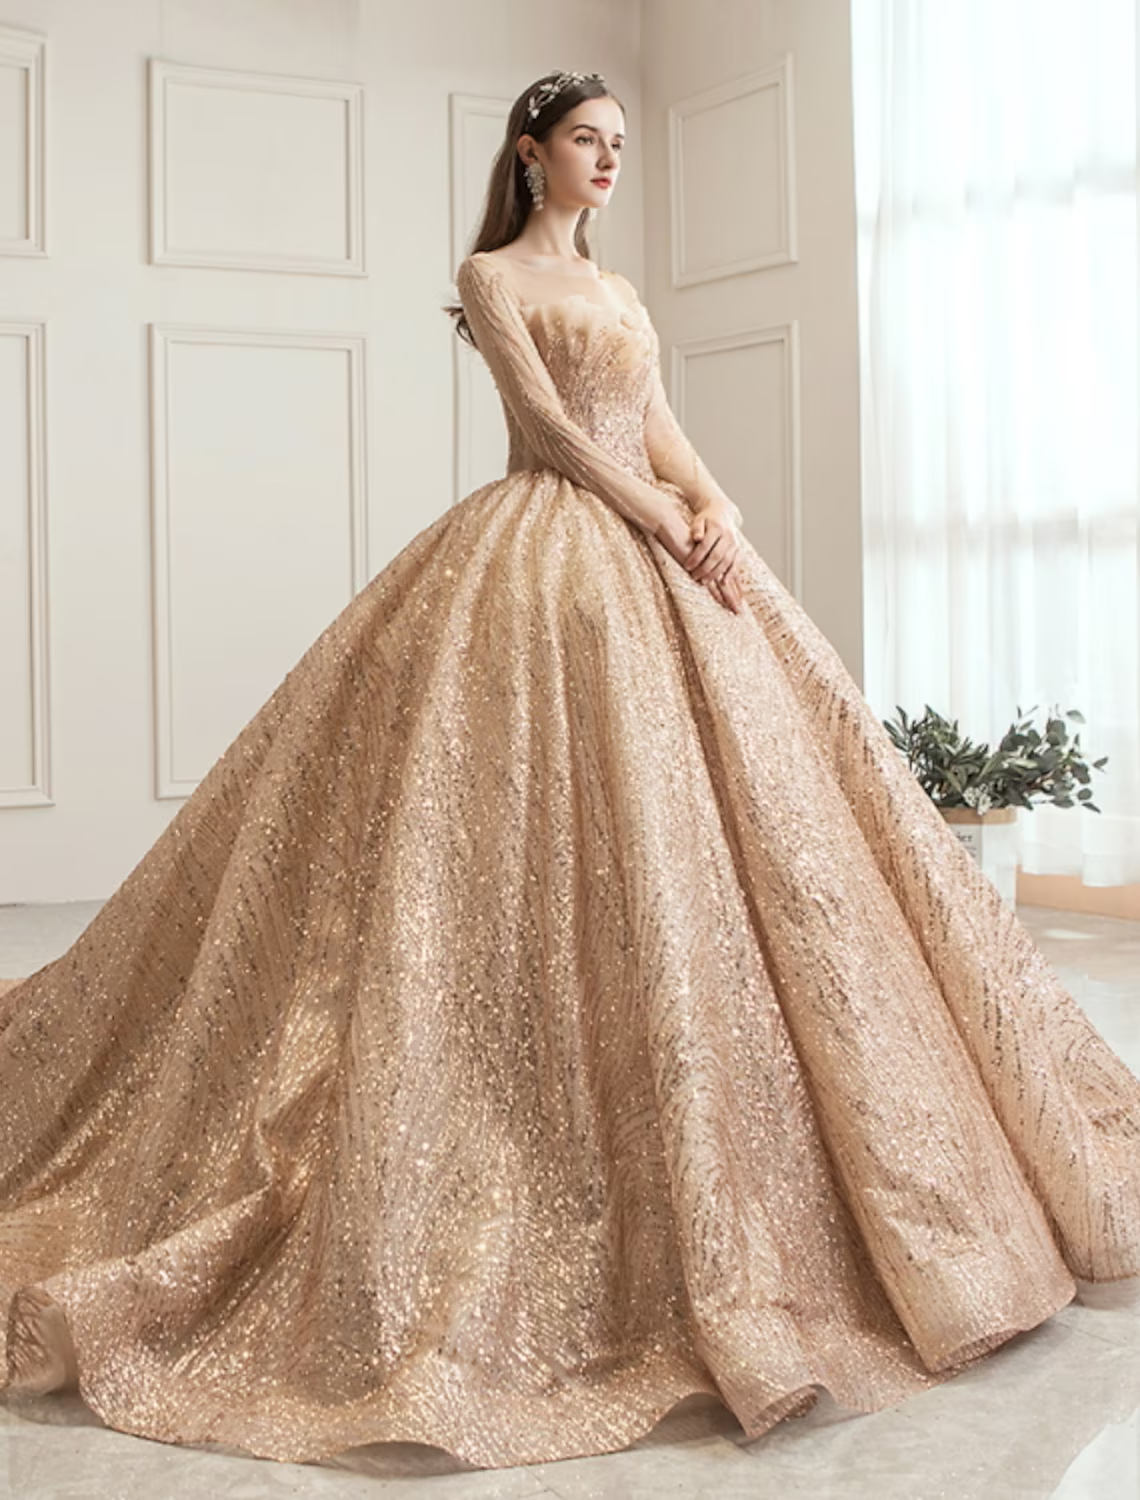 Engagement Wedding Dresses in Color Formal Wedding Dresses Chapel Train Princess Long Sleeve Jewel Neck Tulle With Ruched